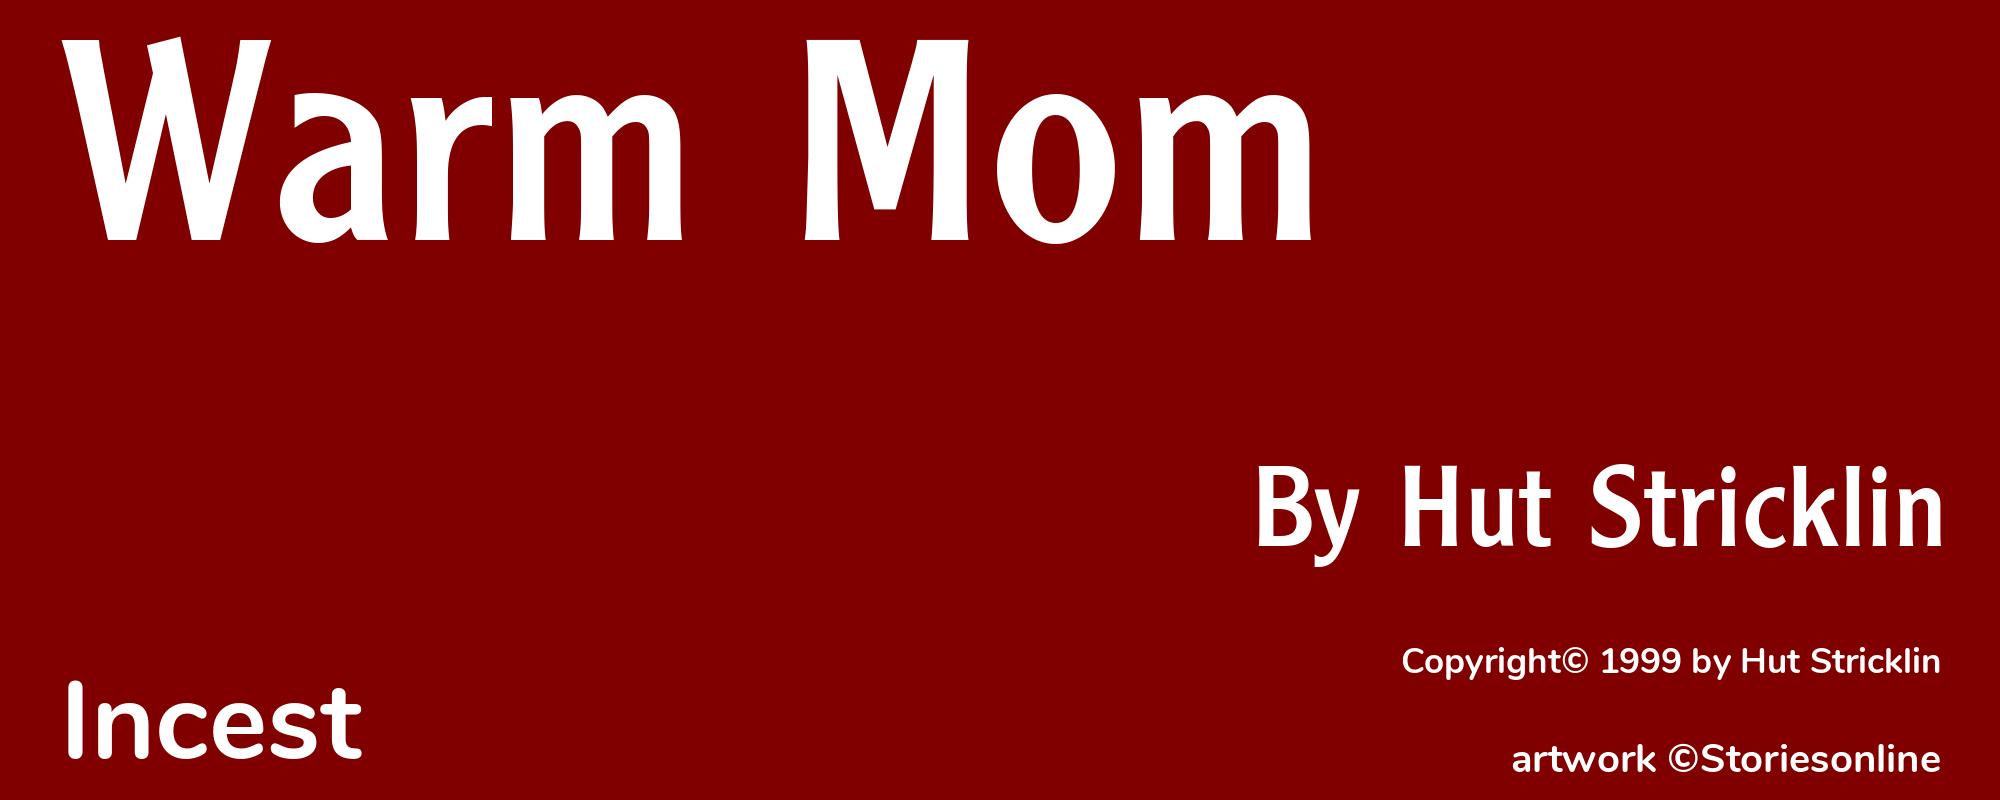 Warm Mom - Cover